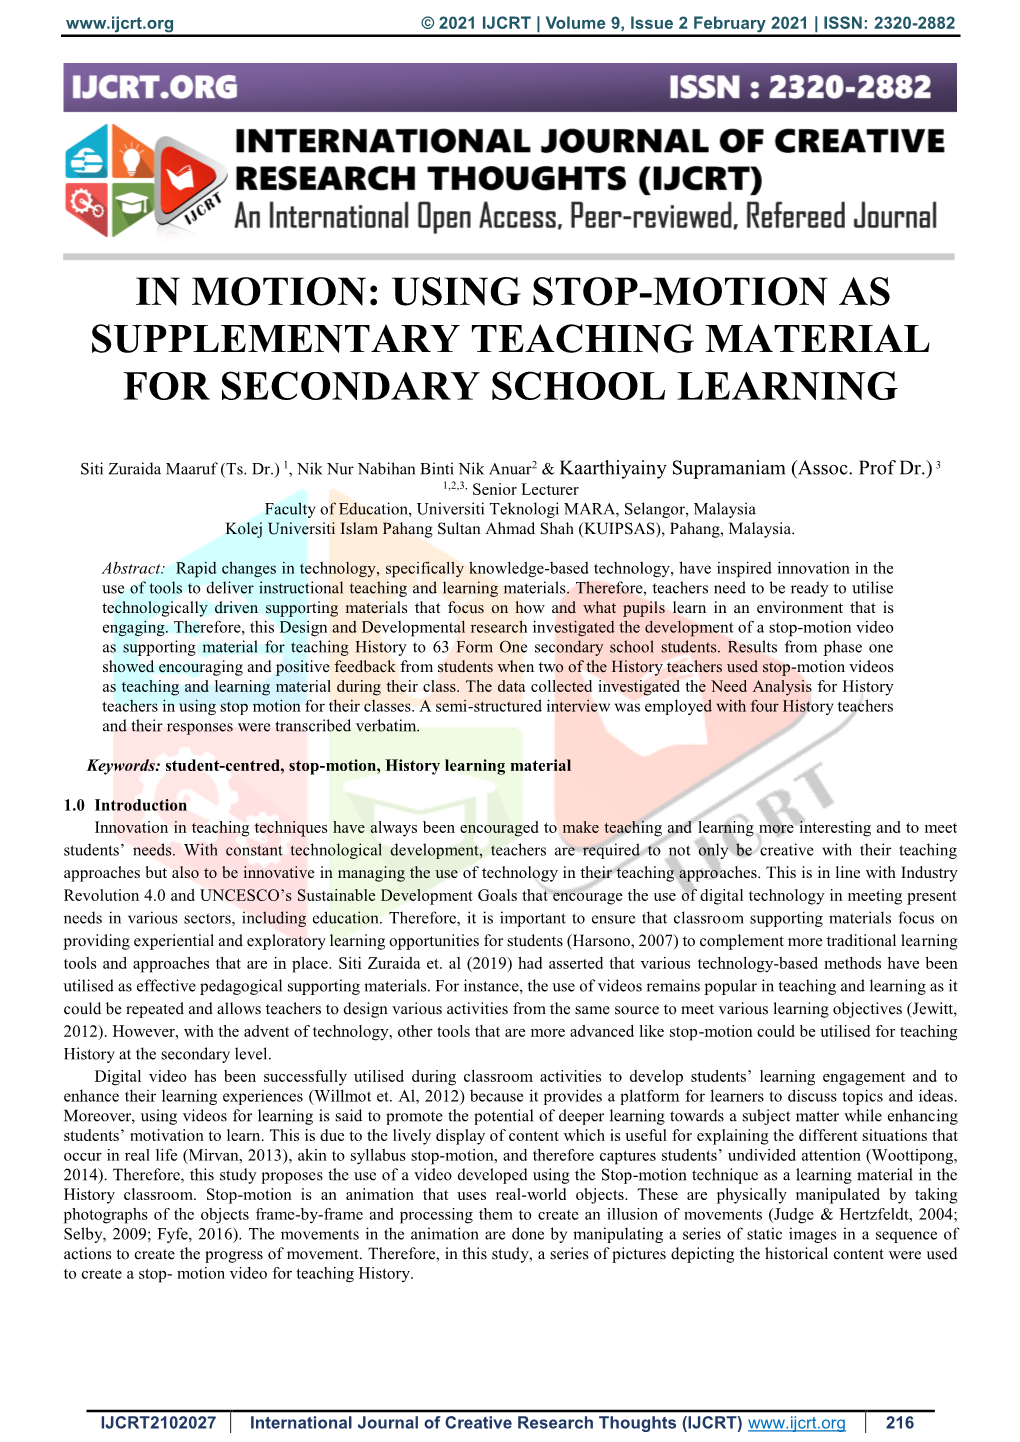 Using Stop-Motion As Supplementary Teaching Material for Secondary School Learning